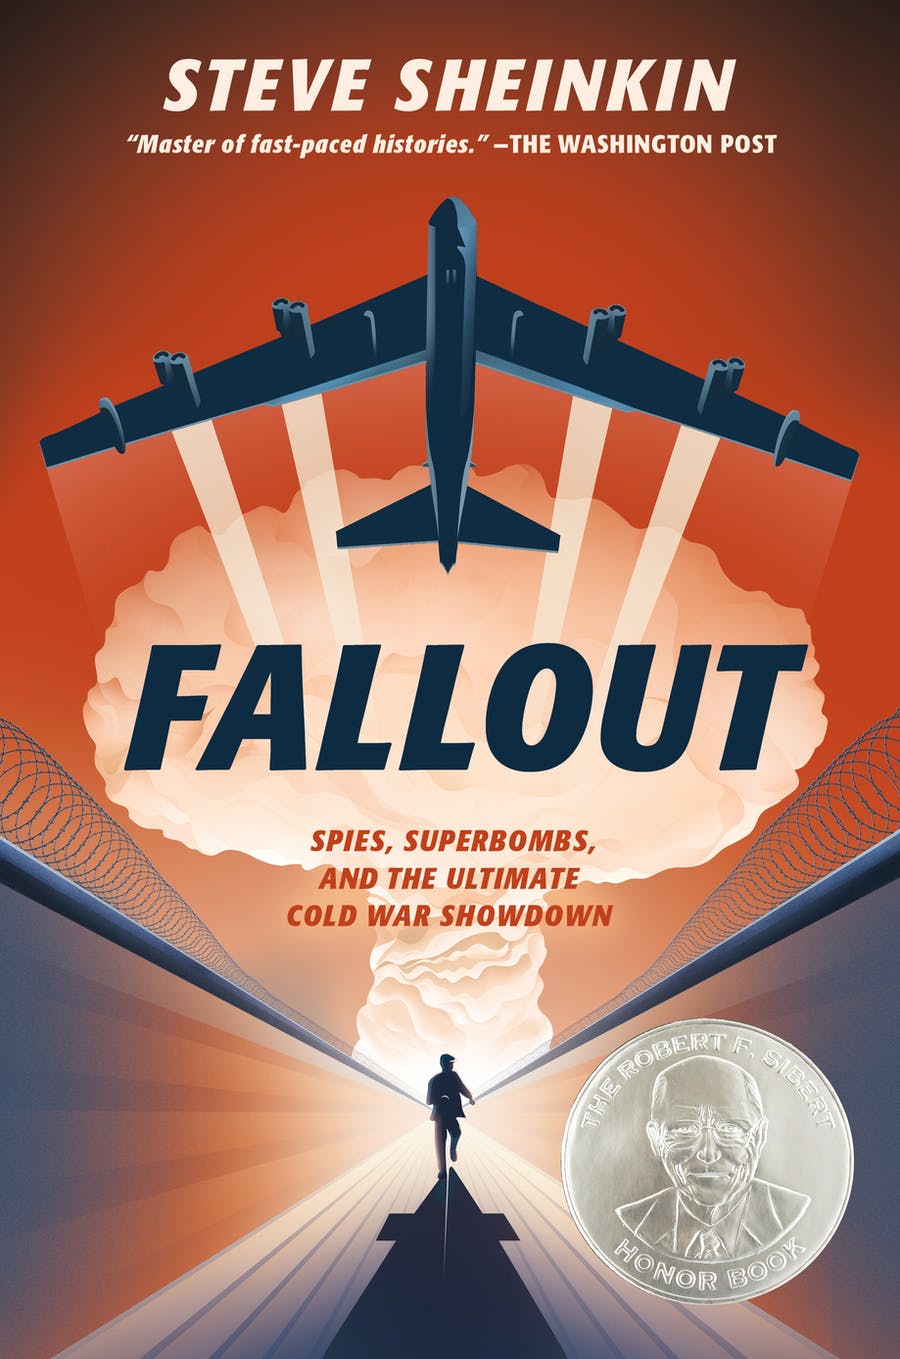 Fallout: Spies, Superbombs, and the Ultimate Cold War Shutdown